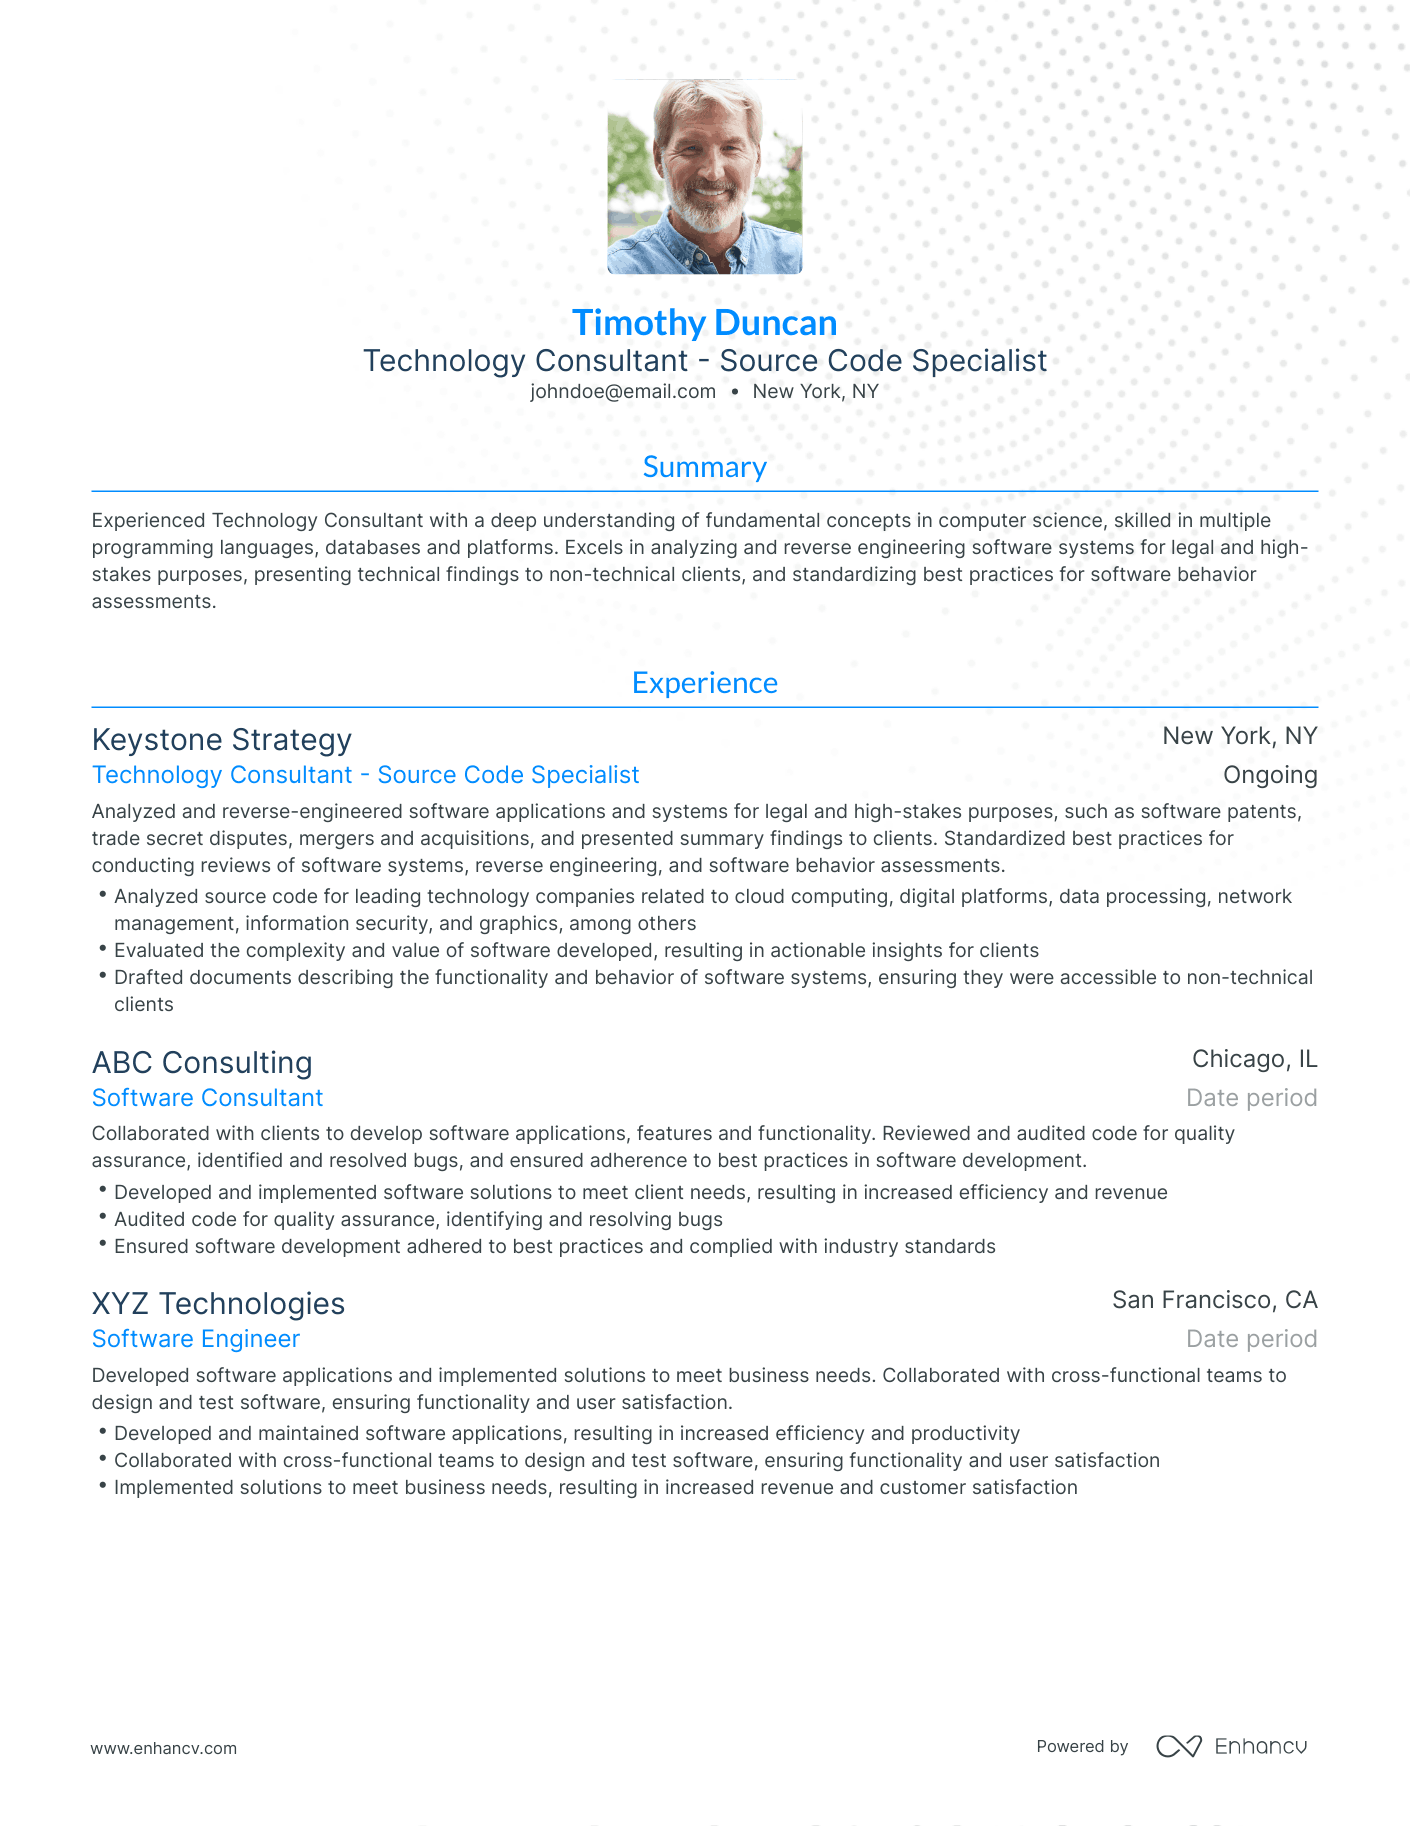 Traditional Technology Consultant Resume Template